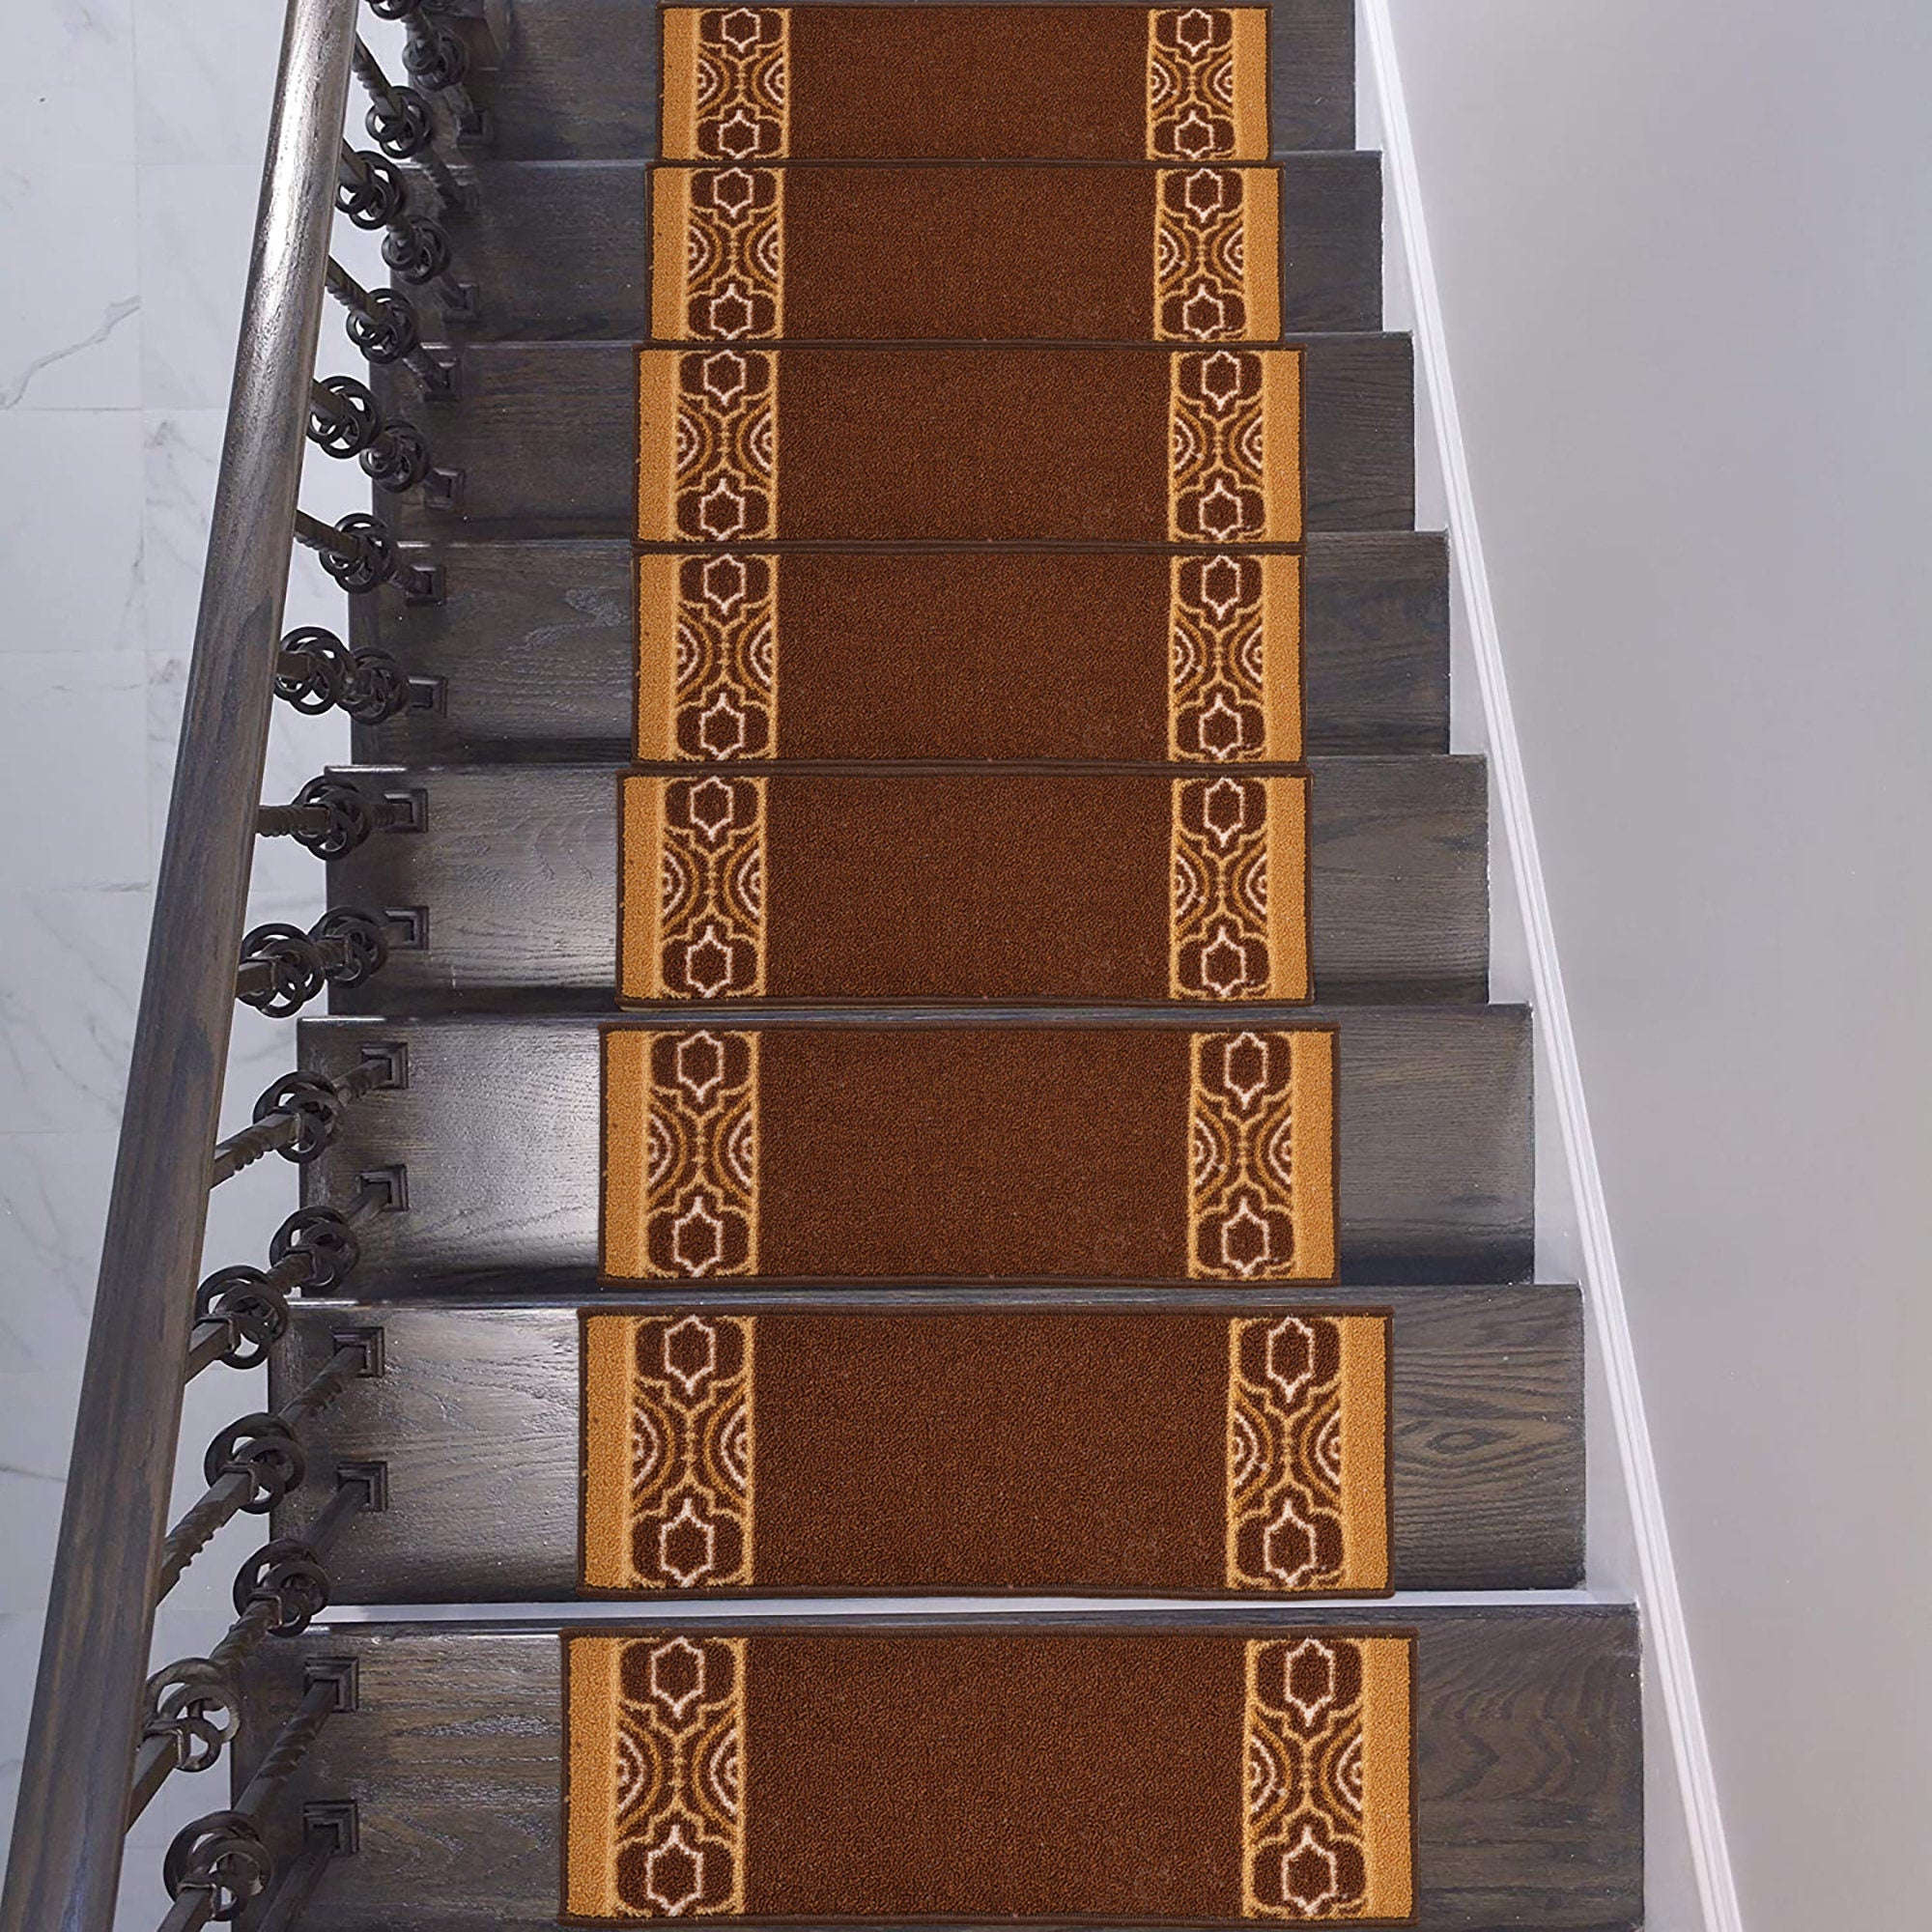 Machine Washable Stair Tread Moroccan Trellis Bordered Brown Skid Resistant Latex Back Carpet Stair Treads Size 8.5" x 26" Many Set Options